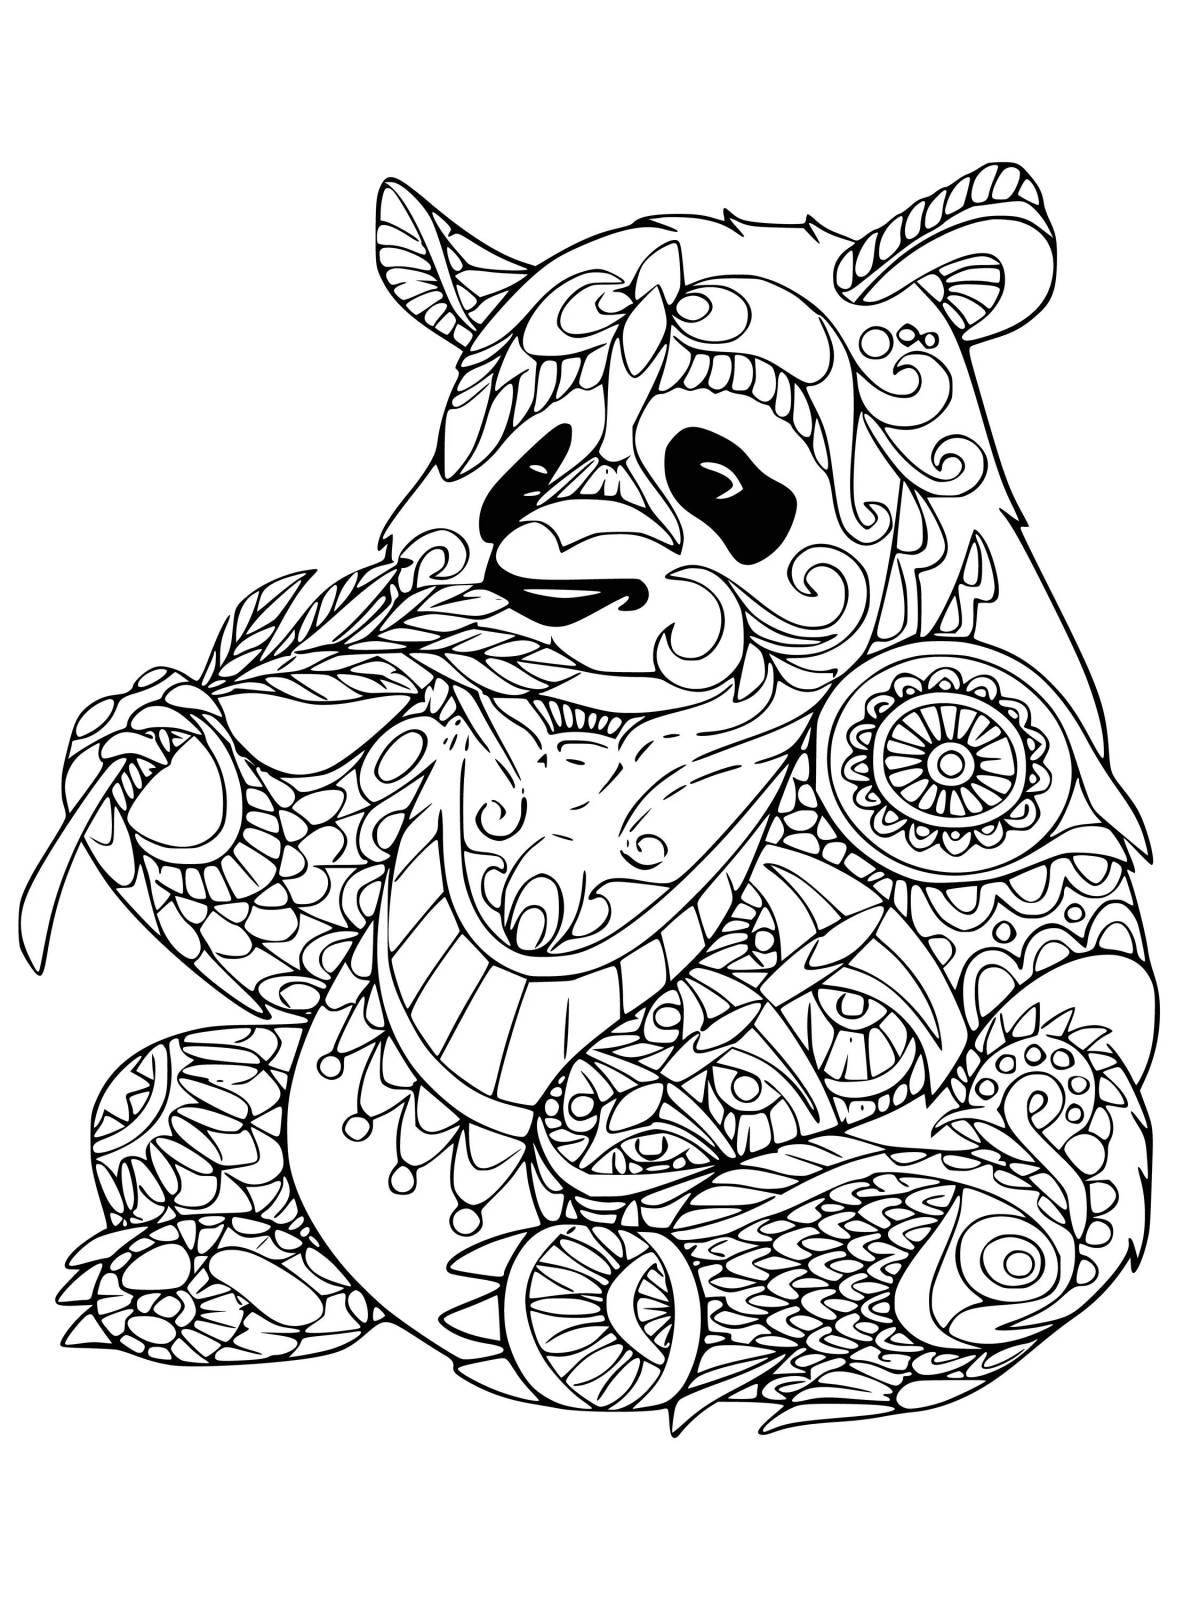 Intriguing coloring pages